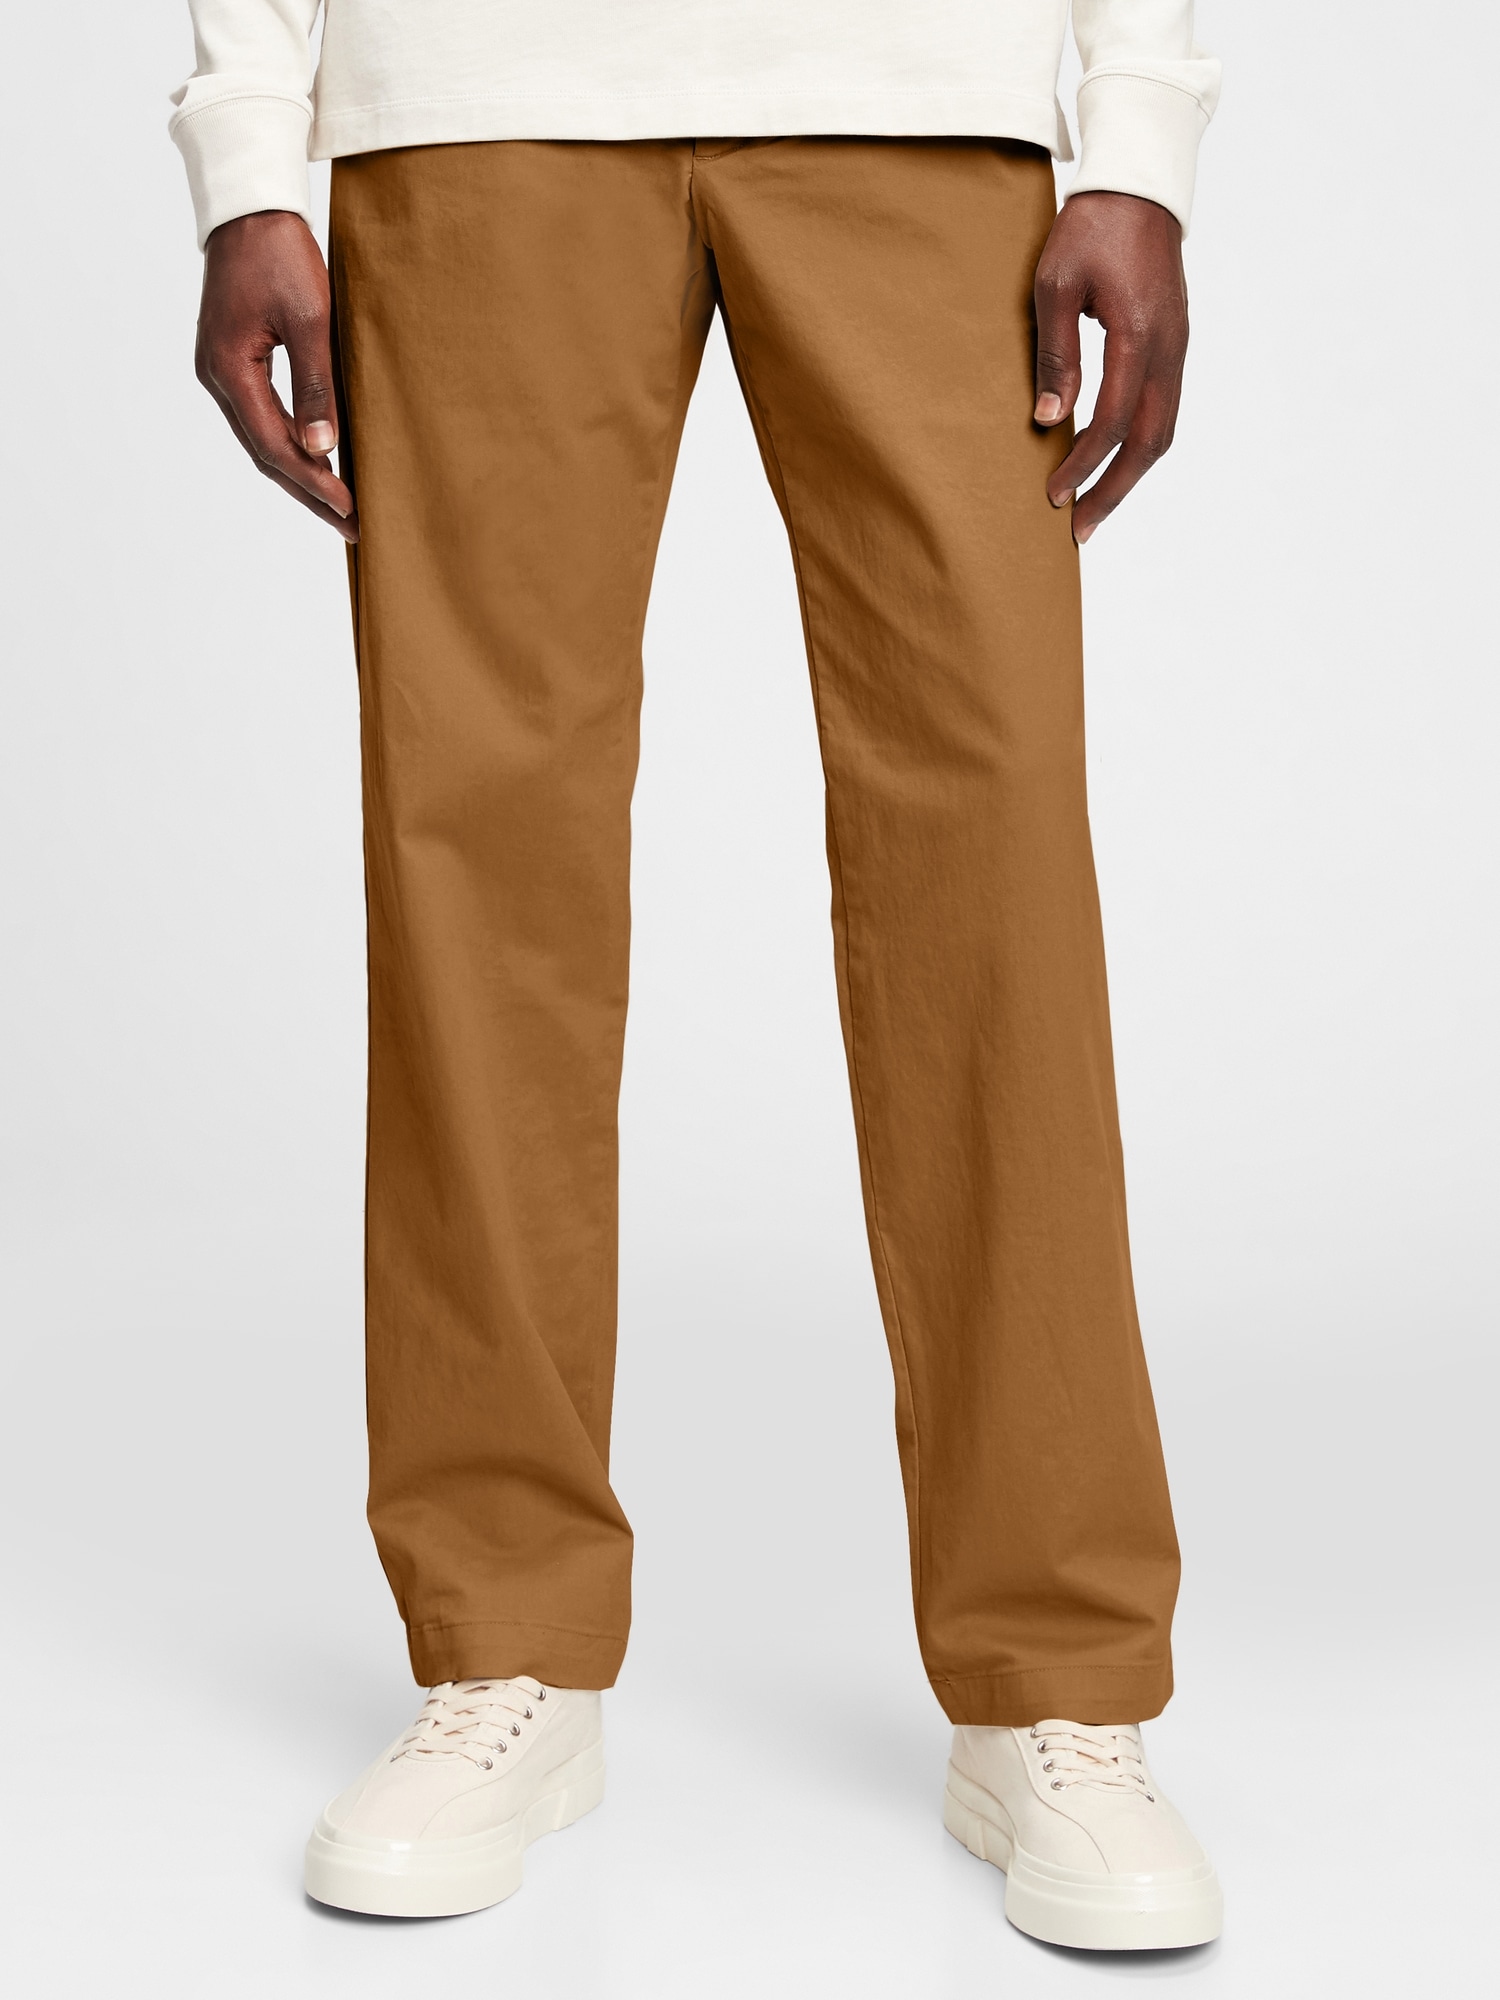 Gap Modern Khakis In Relaxed Fit With Flex In Palomino Brown | ModeSens